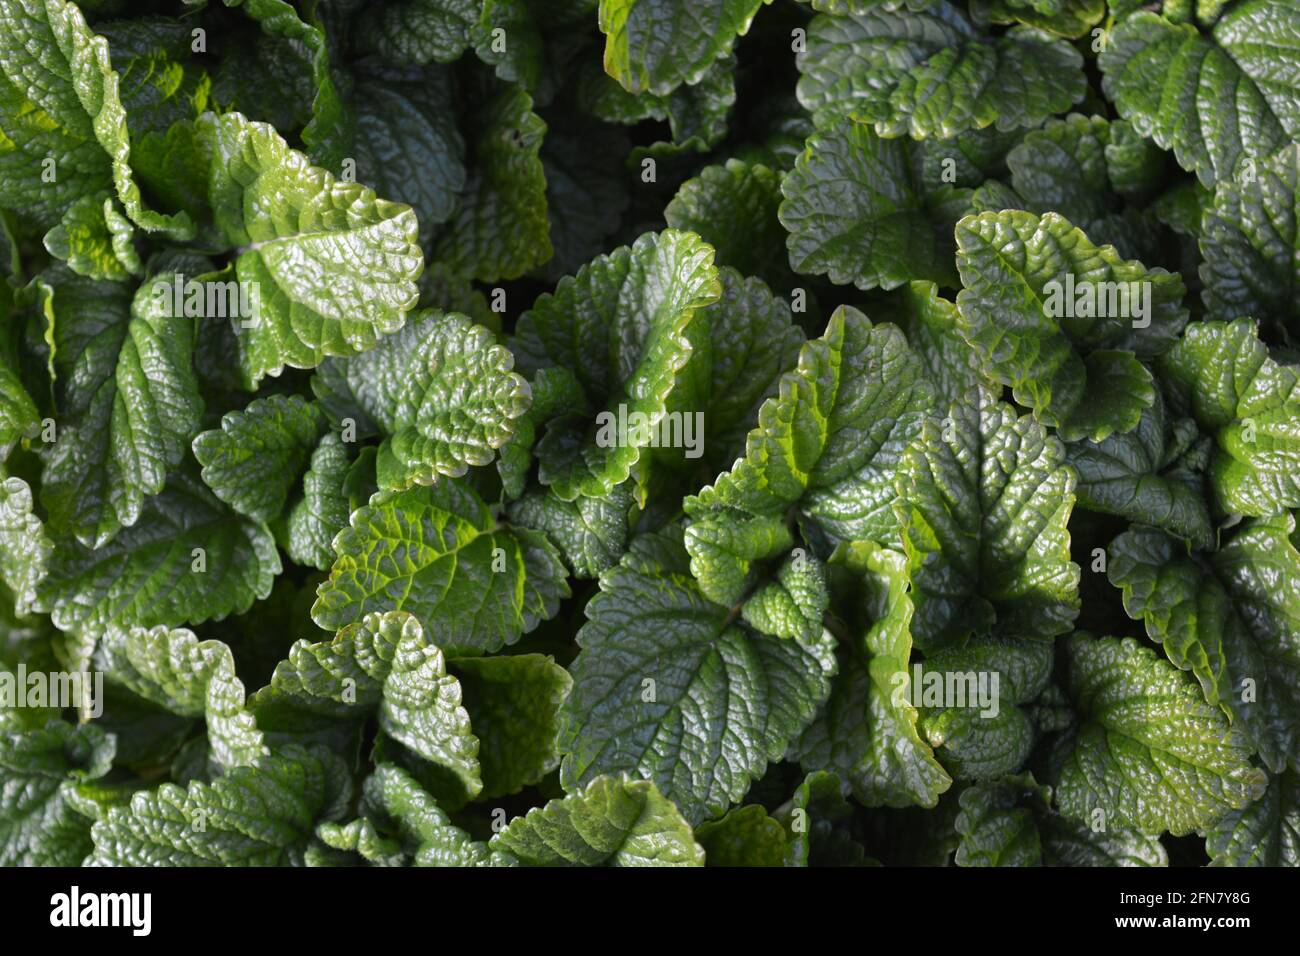 Lemon balm, also known as Melissa officinalis, a lemon scented herb Stock Photo